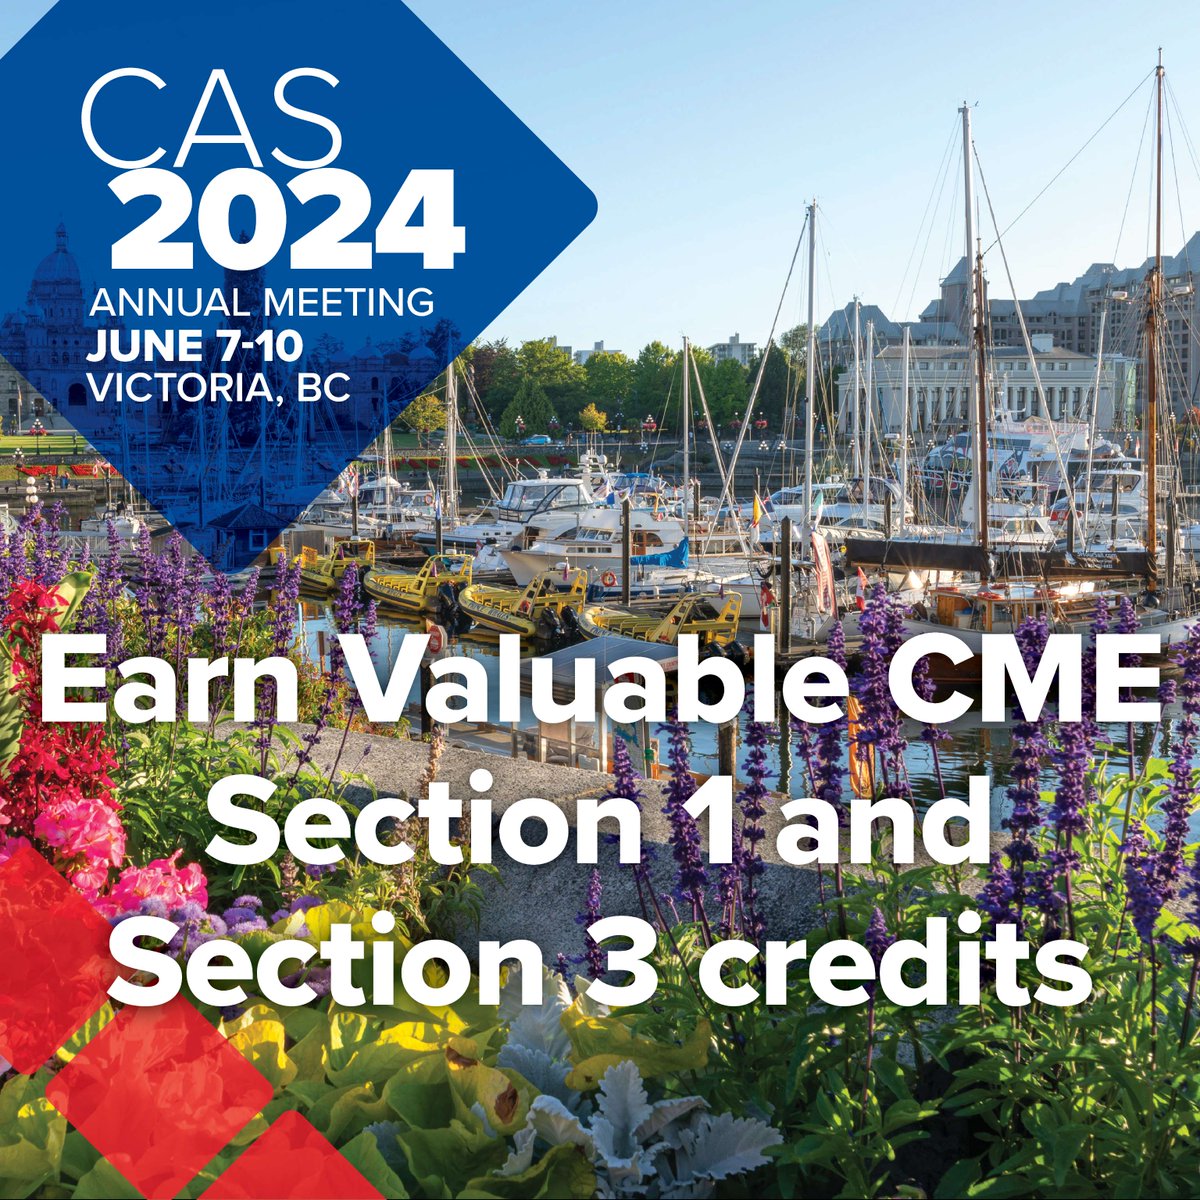 The #CASAM2024 is a great opportunity to gain valuable CME credits! We are offering up to 17 hours of Section 1 credits and a total of 48 hours of Section 3 credits through workshops, PBLDs and test-enhanced learning sessions. June 7-10, 2024. 📝More at cas.ca/annual-meeting